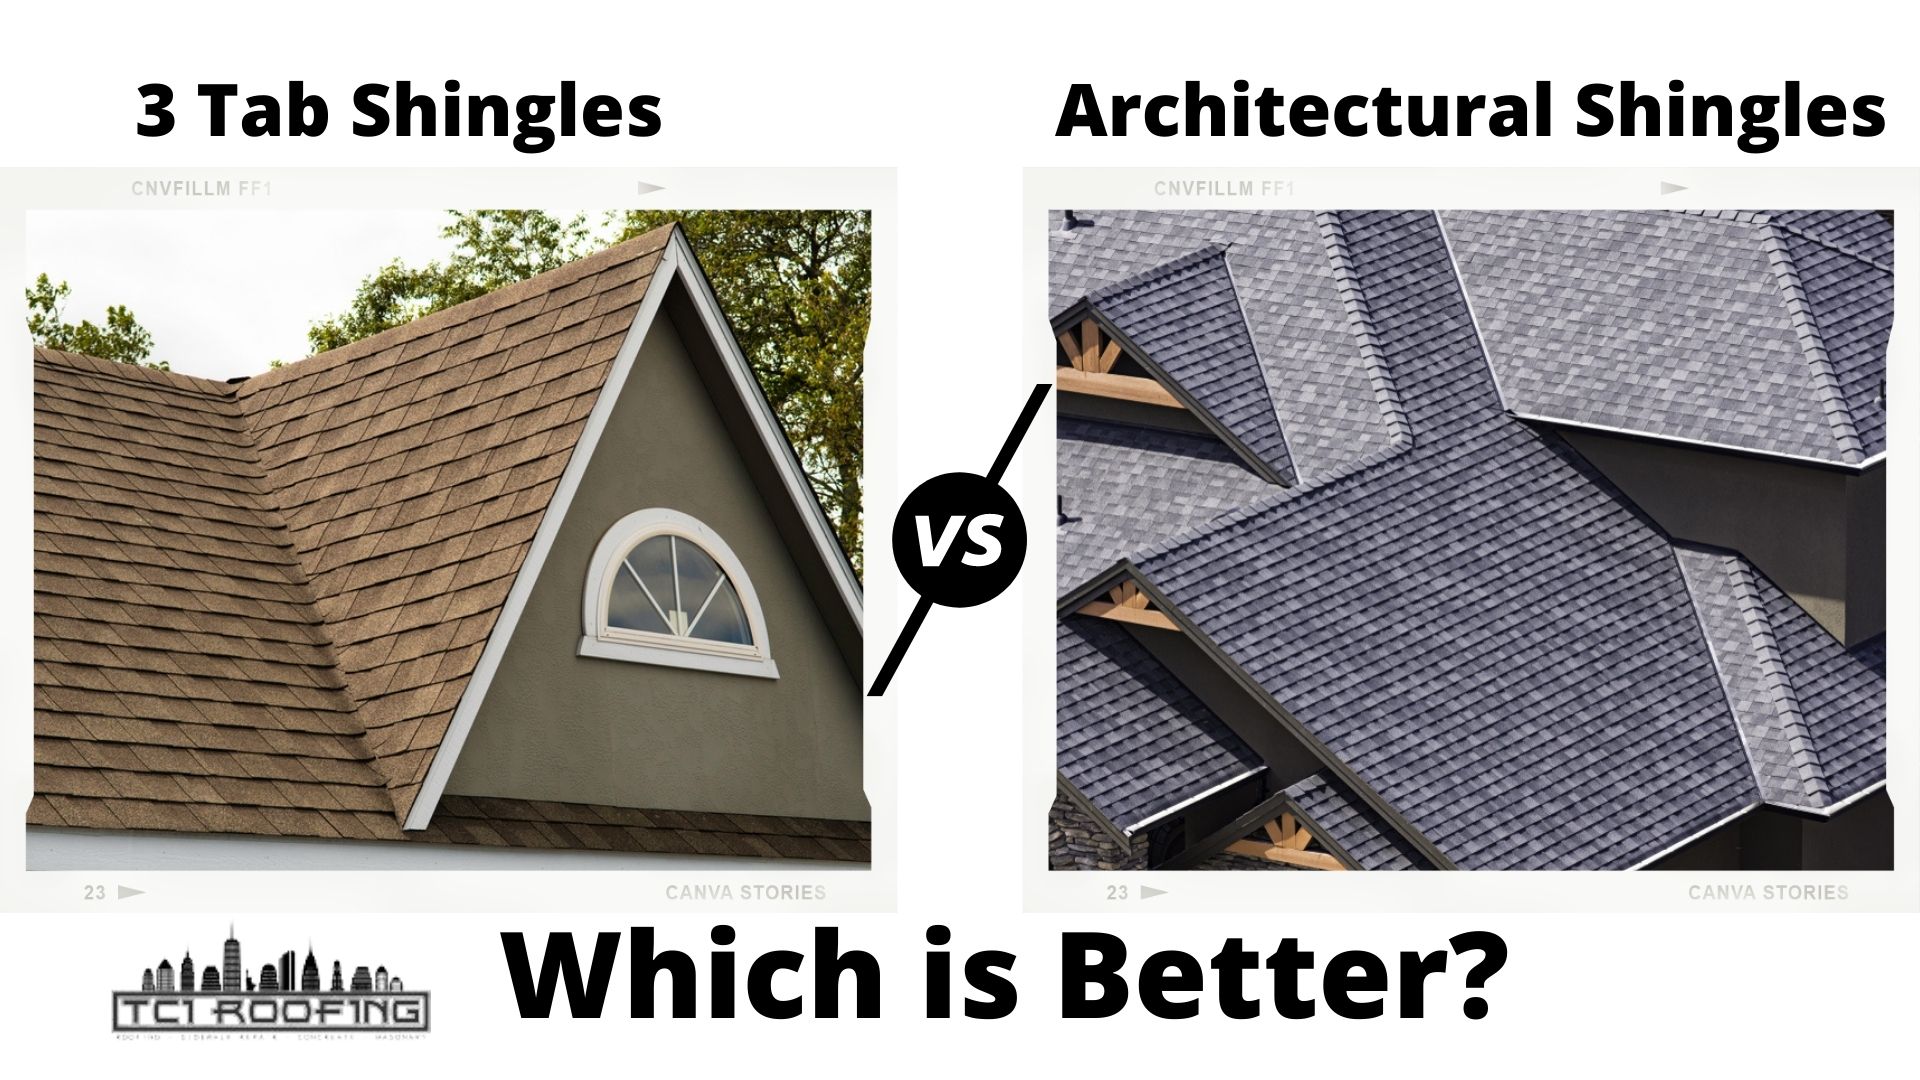 are architectural shingles better than 3 tab shingles